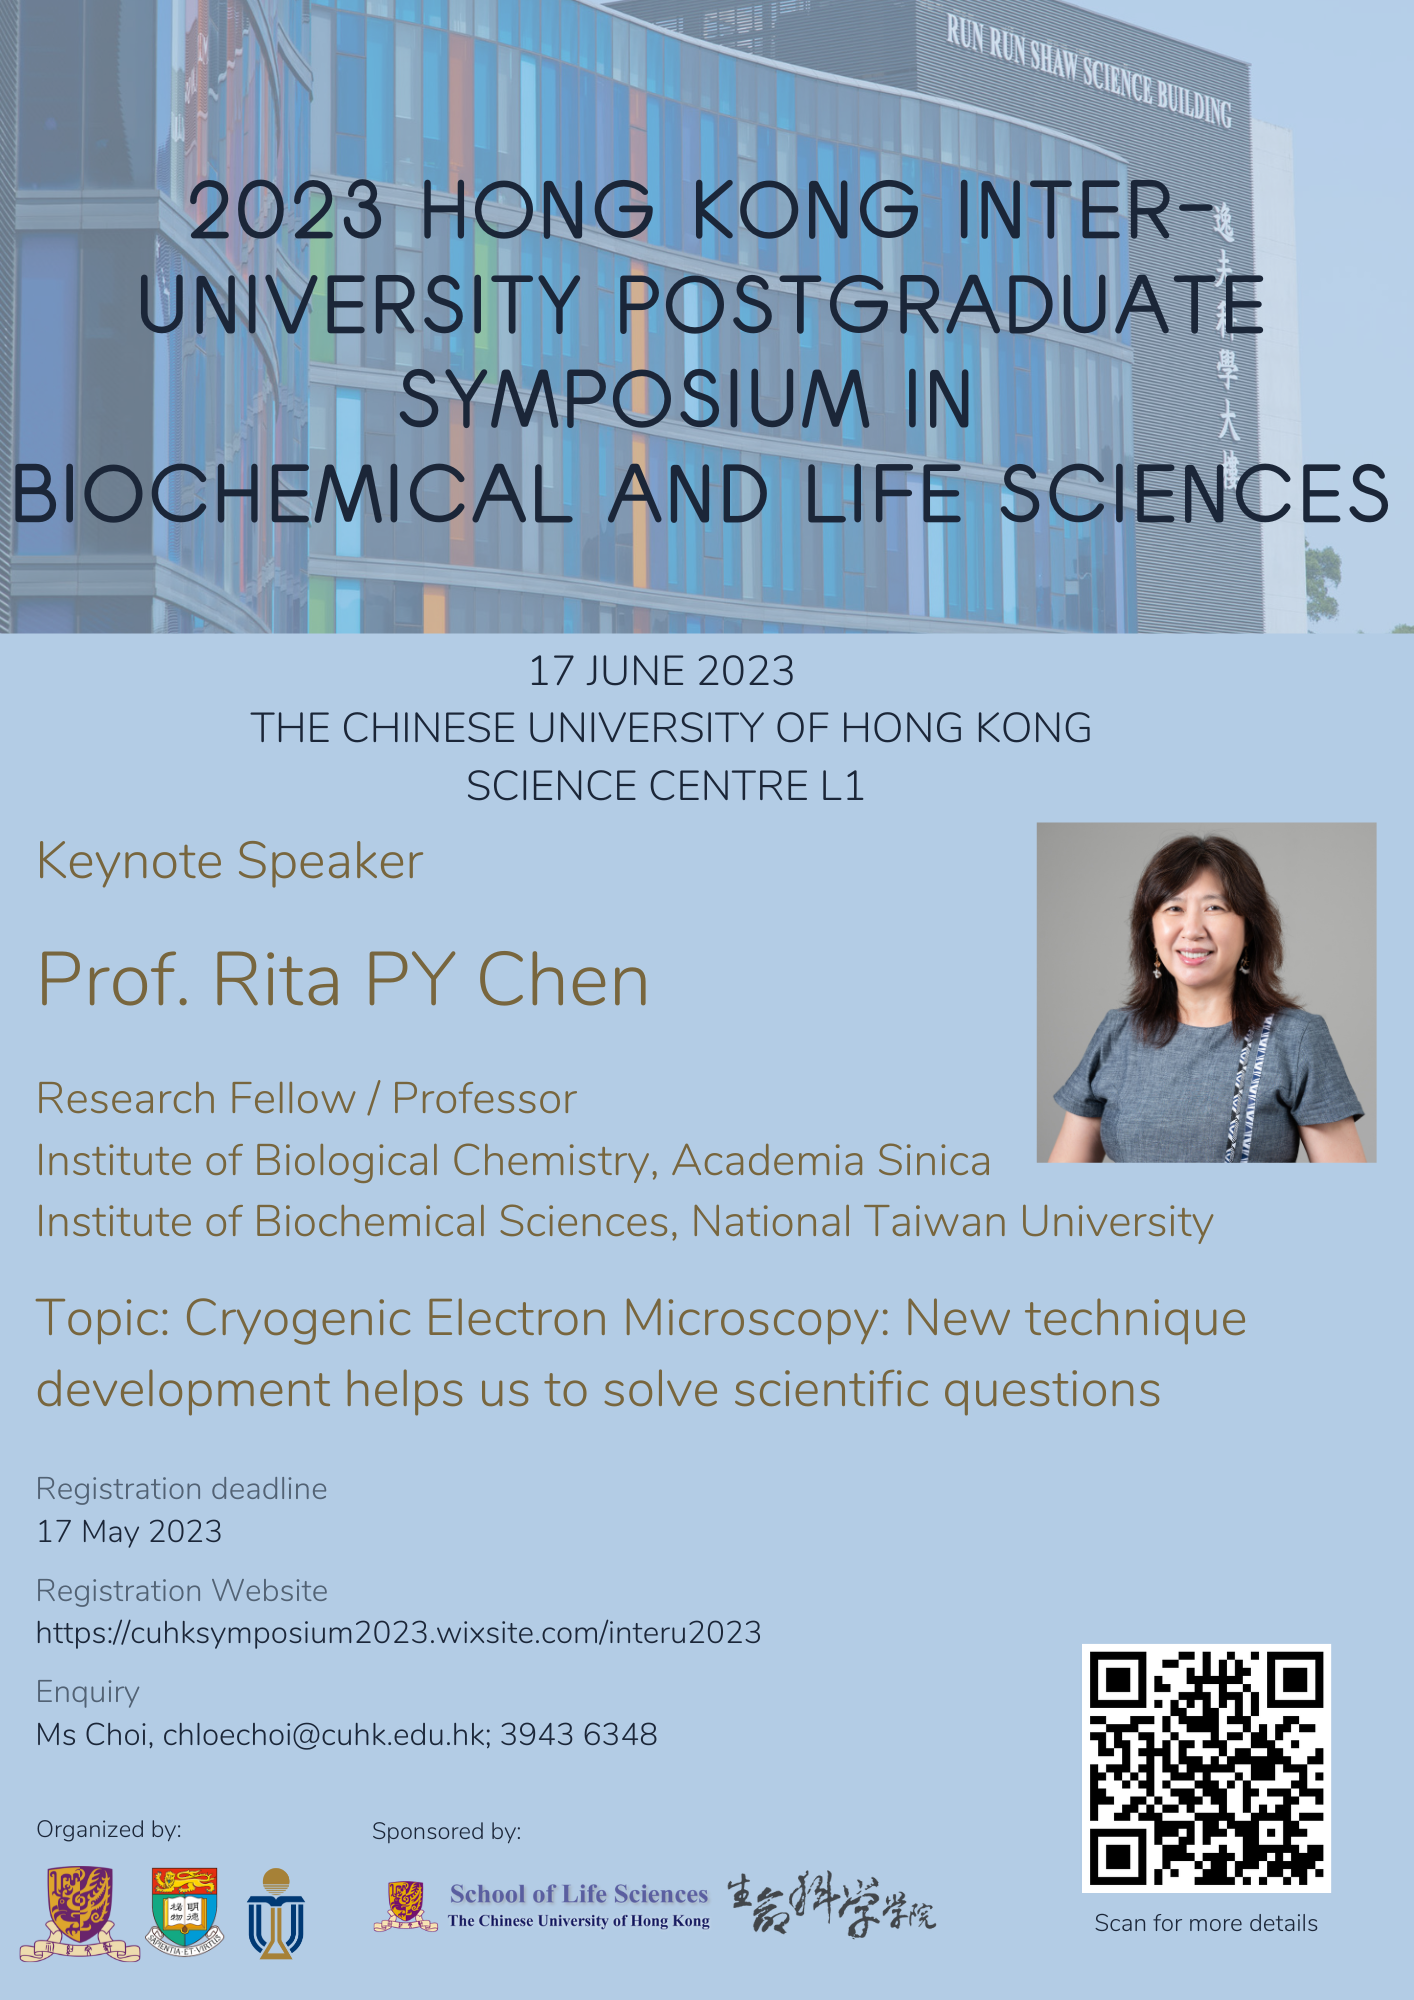 2023 Hong Kong Inter University Postgraduate Symposium in Biochemical and Life Sciences promotion